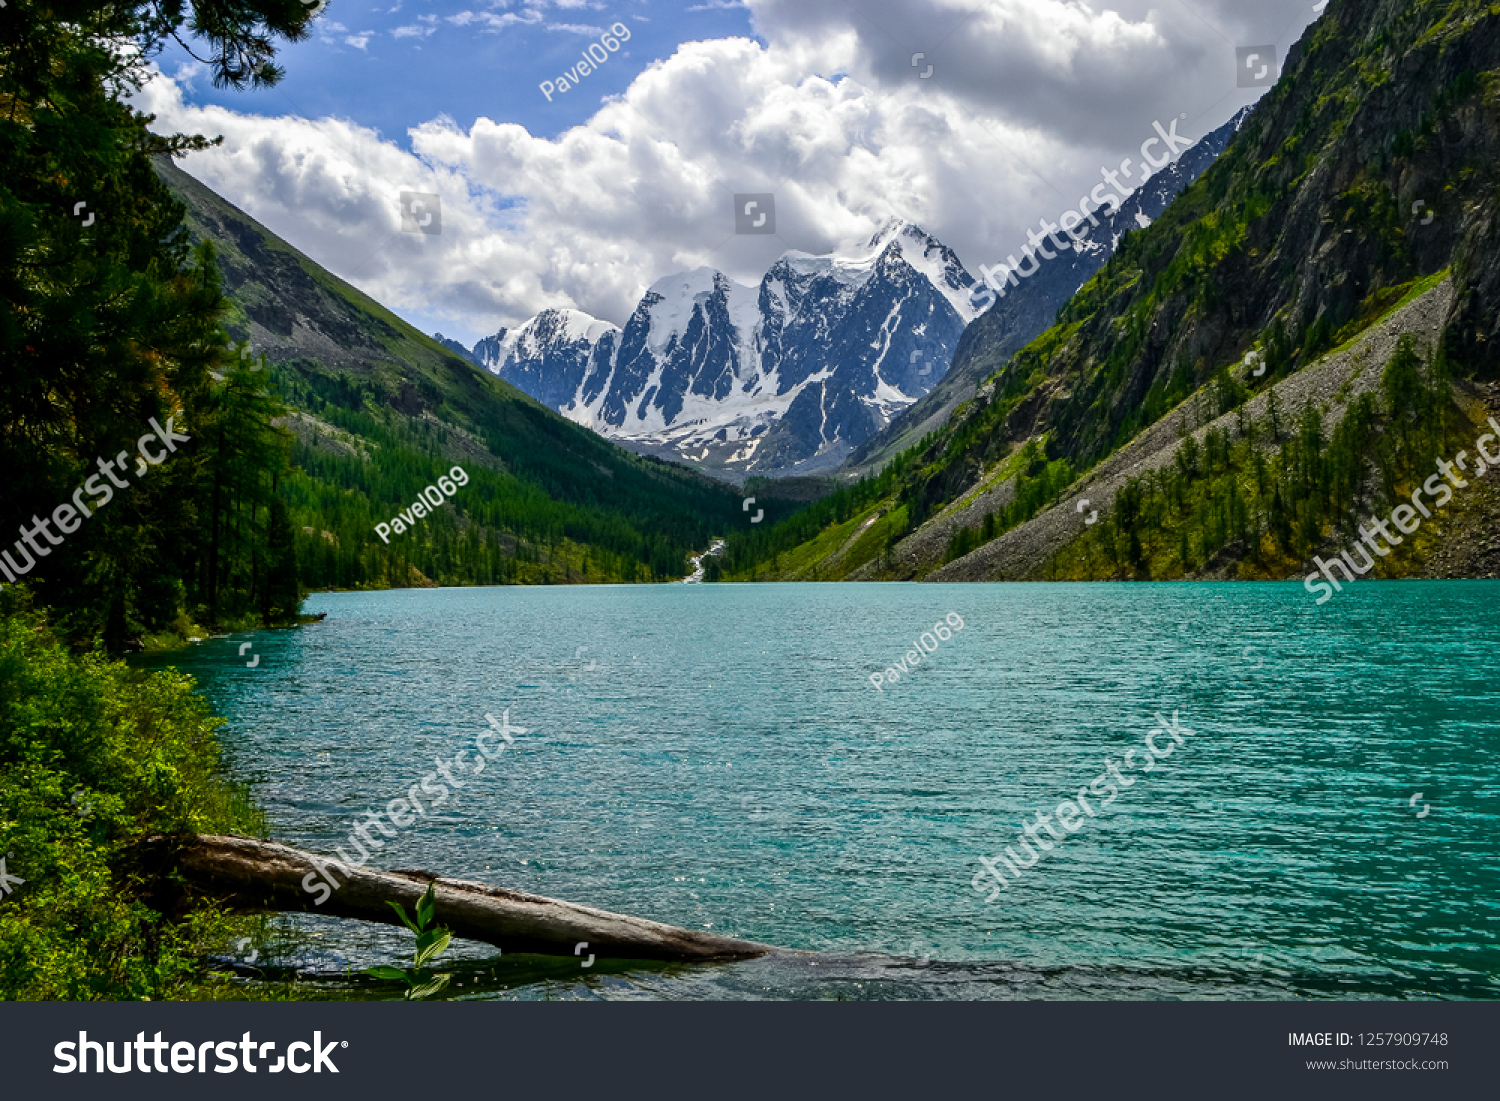 Altai. Shavlinskoe lake - the pearl of Altaimountains Dream, Beauty and fairy Tale #1257909748